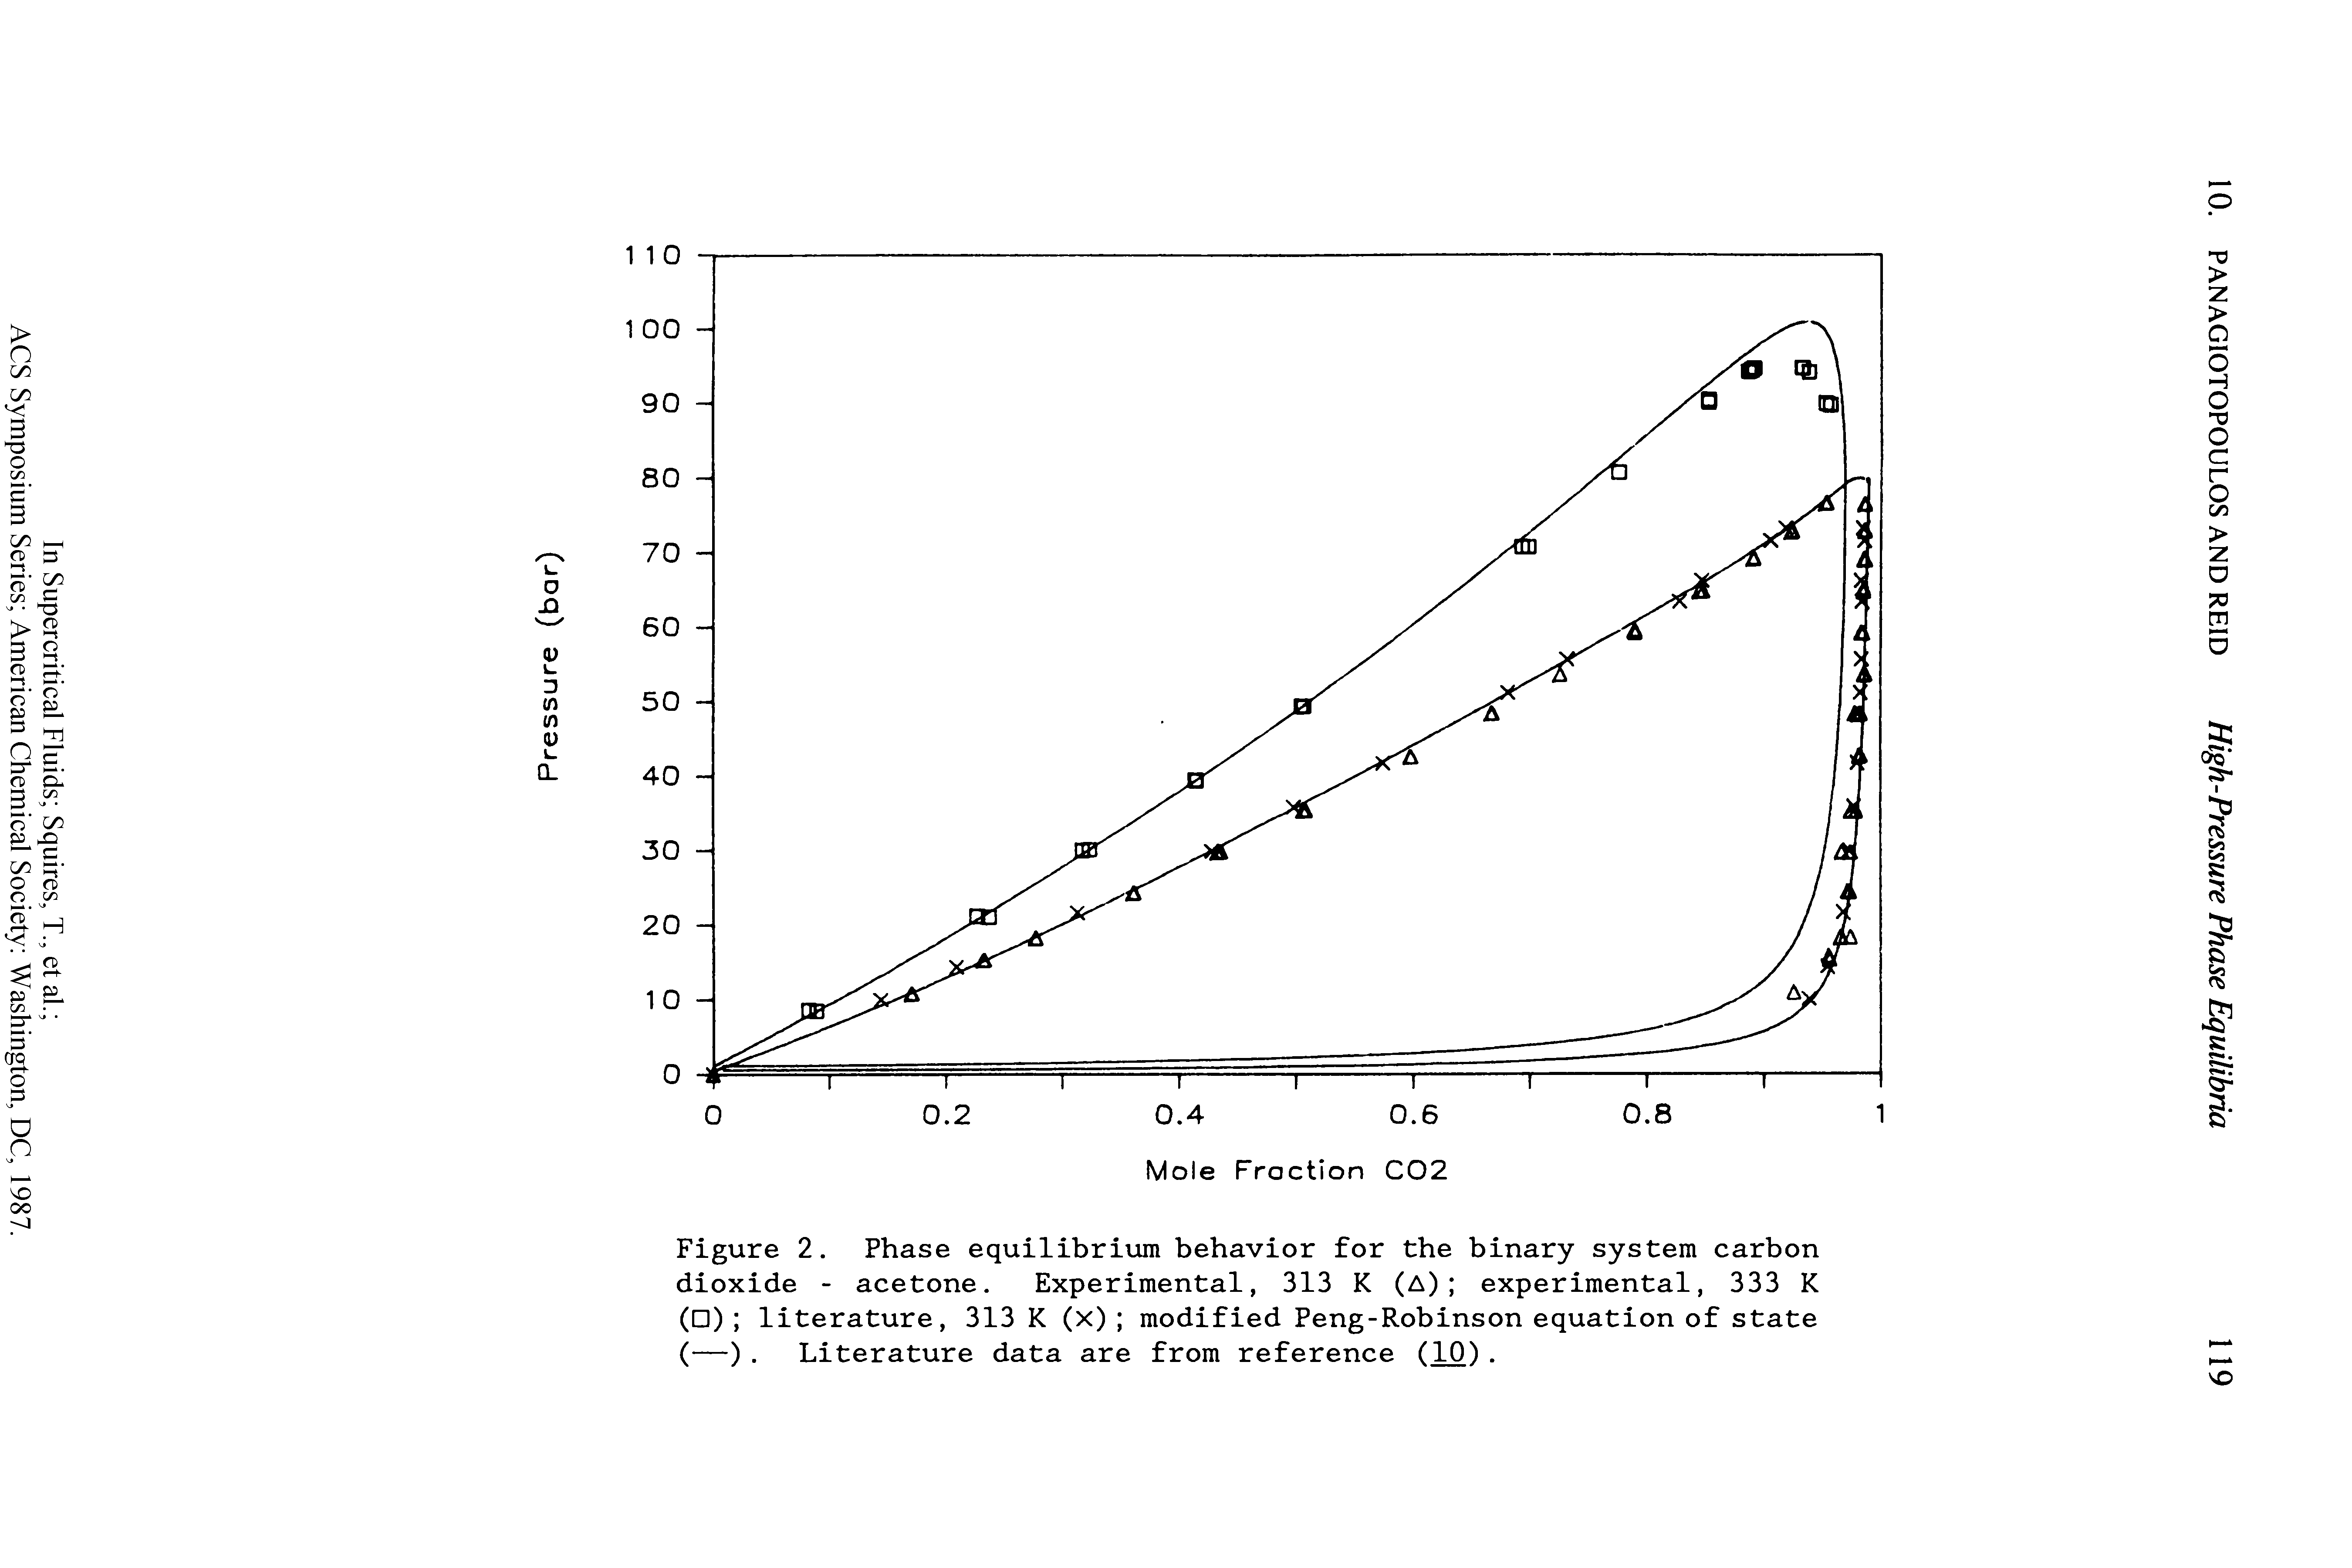 Figure 2. Phase equilibrium behavior for the binary system carbon dioxide - acetone. Experimental, 313 K (A) experimental, 333 K ( ) literature, 313 K (x) modified Peng-Robinson equation of state (—). Literature data are from reference (10).